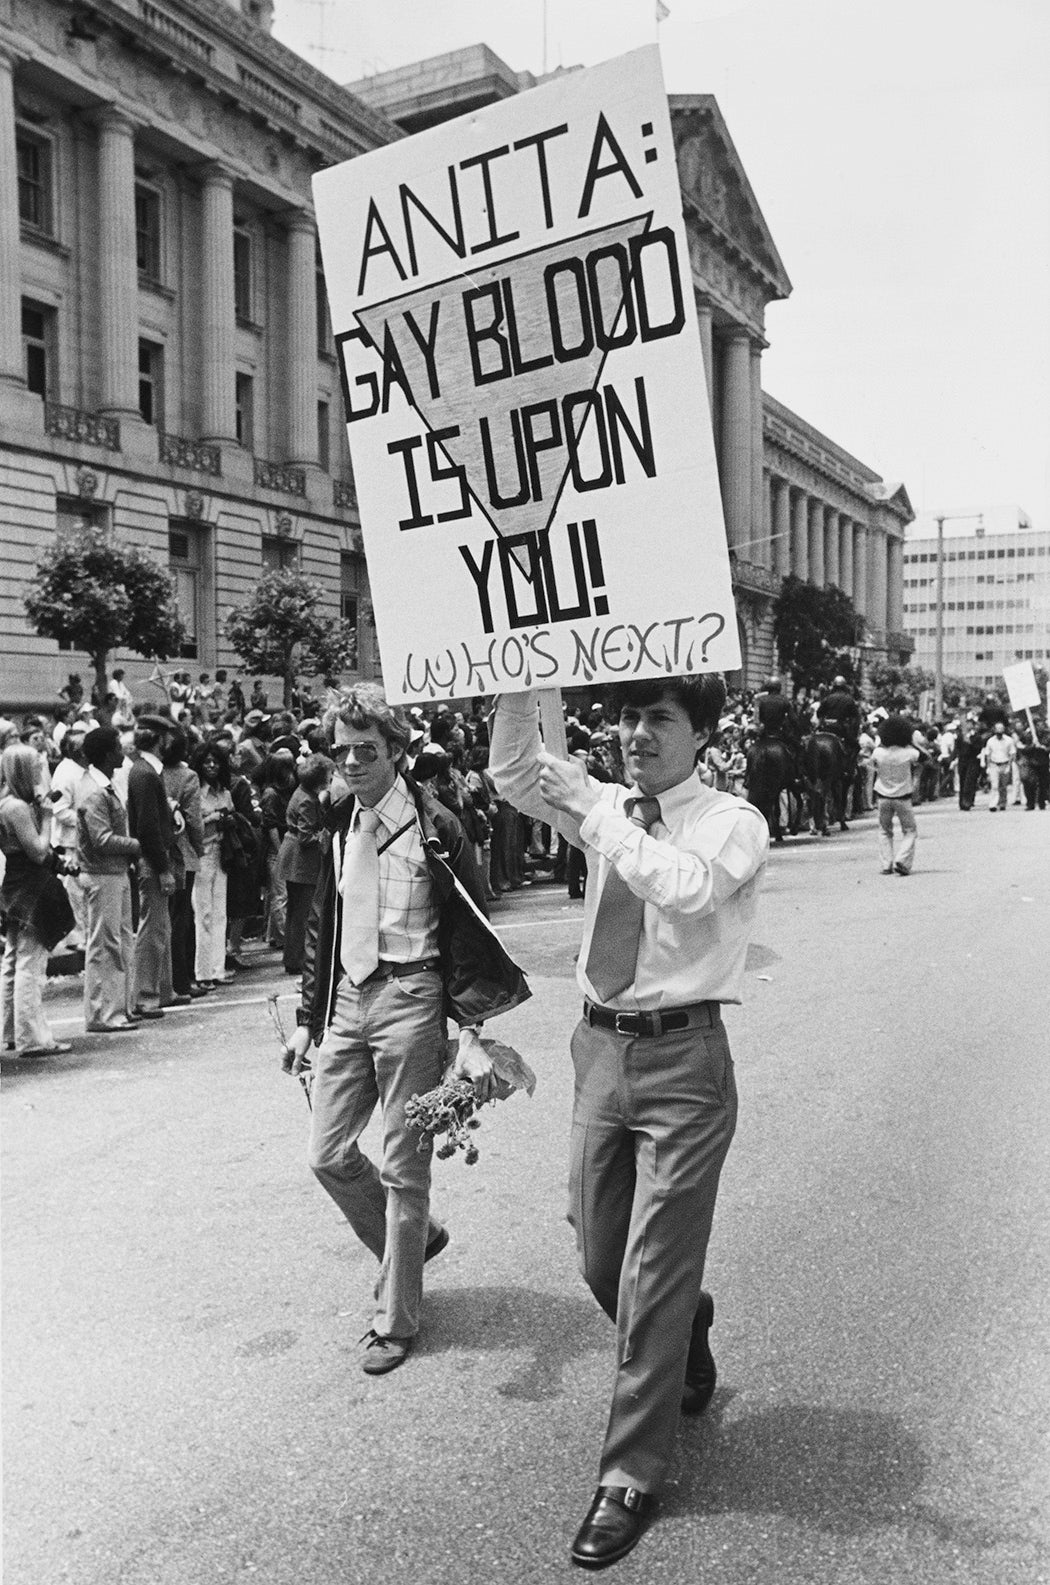 An activist carries a placard which reads 'Anita: Gay Blood Is Upon You! Who's Next?' during the fifth 'Gay Freedom Day' (San Francisco Pride) during which many protesters ridiculed singer Anita Bryant and her anti gay crusade, San Francisco, California, US, 26th June 1977.